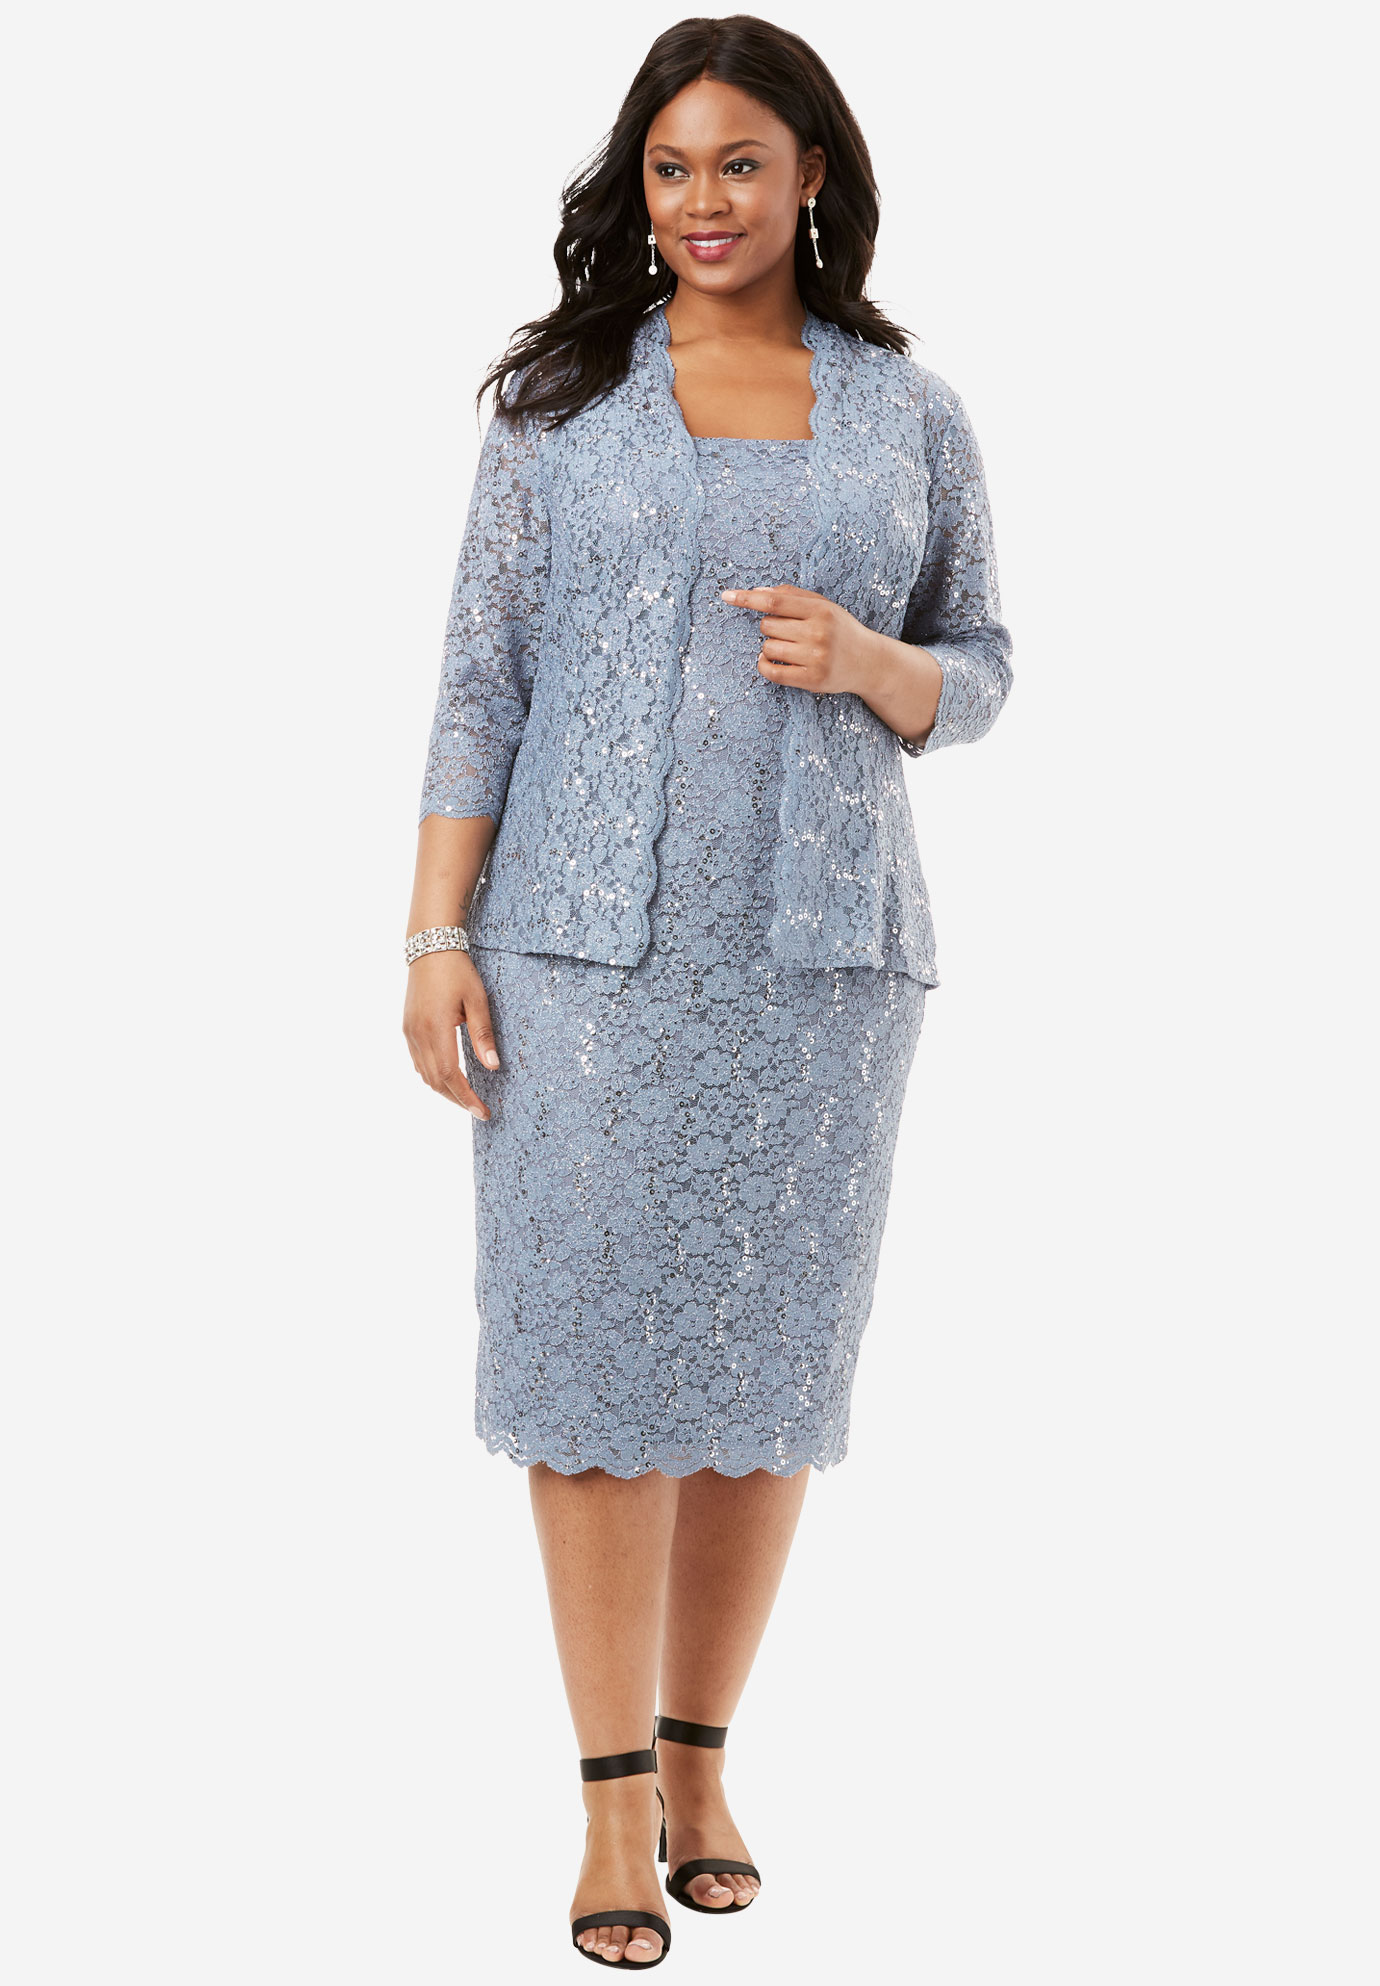 Lace Jacket Dress by Alex Evenings Plus Size Special Occasion  Full